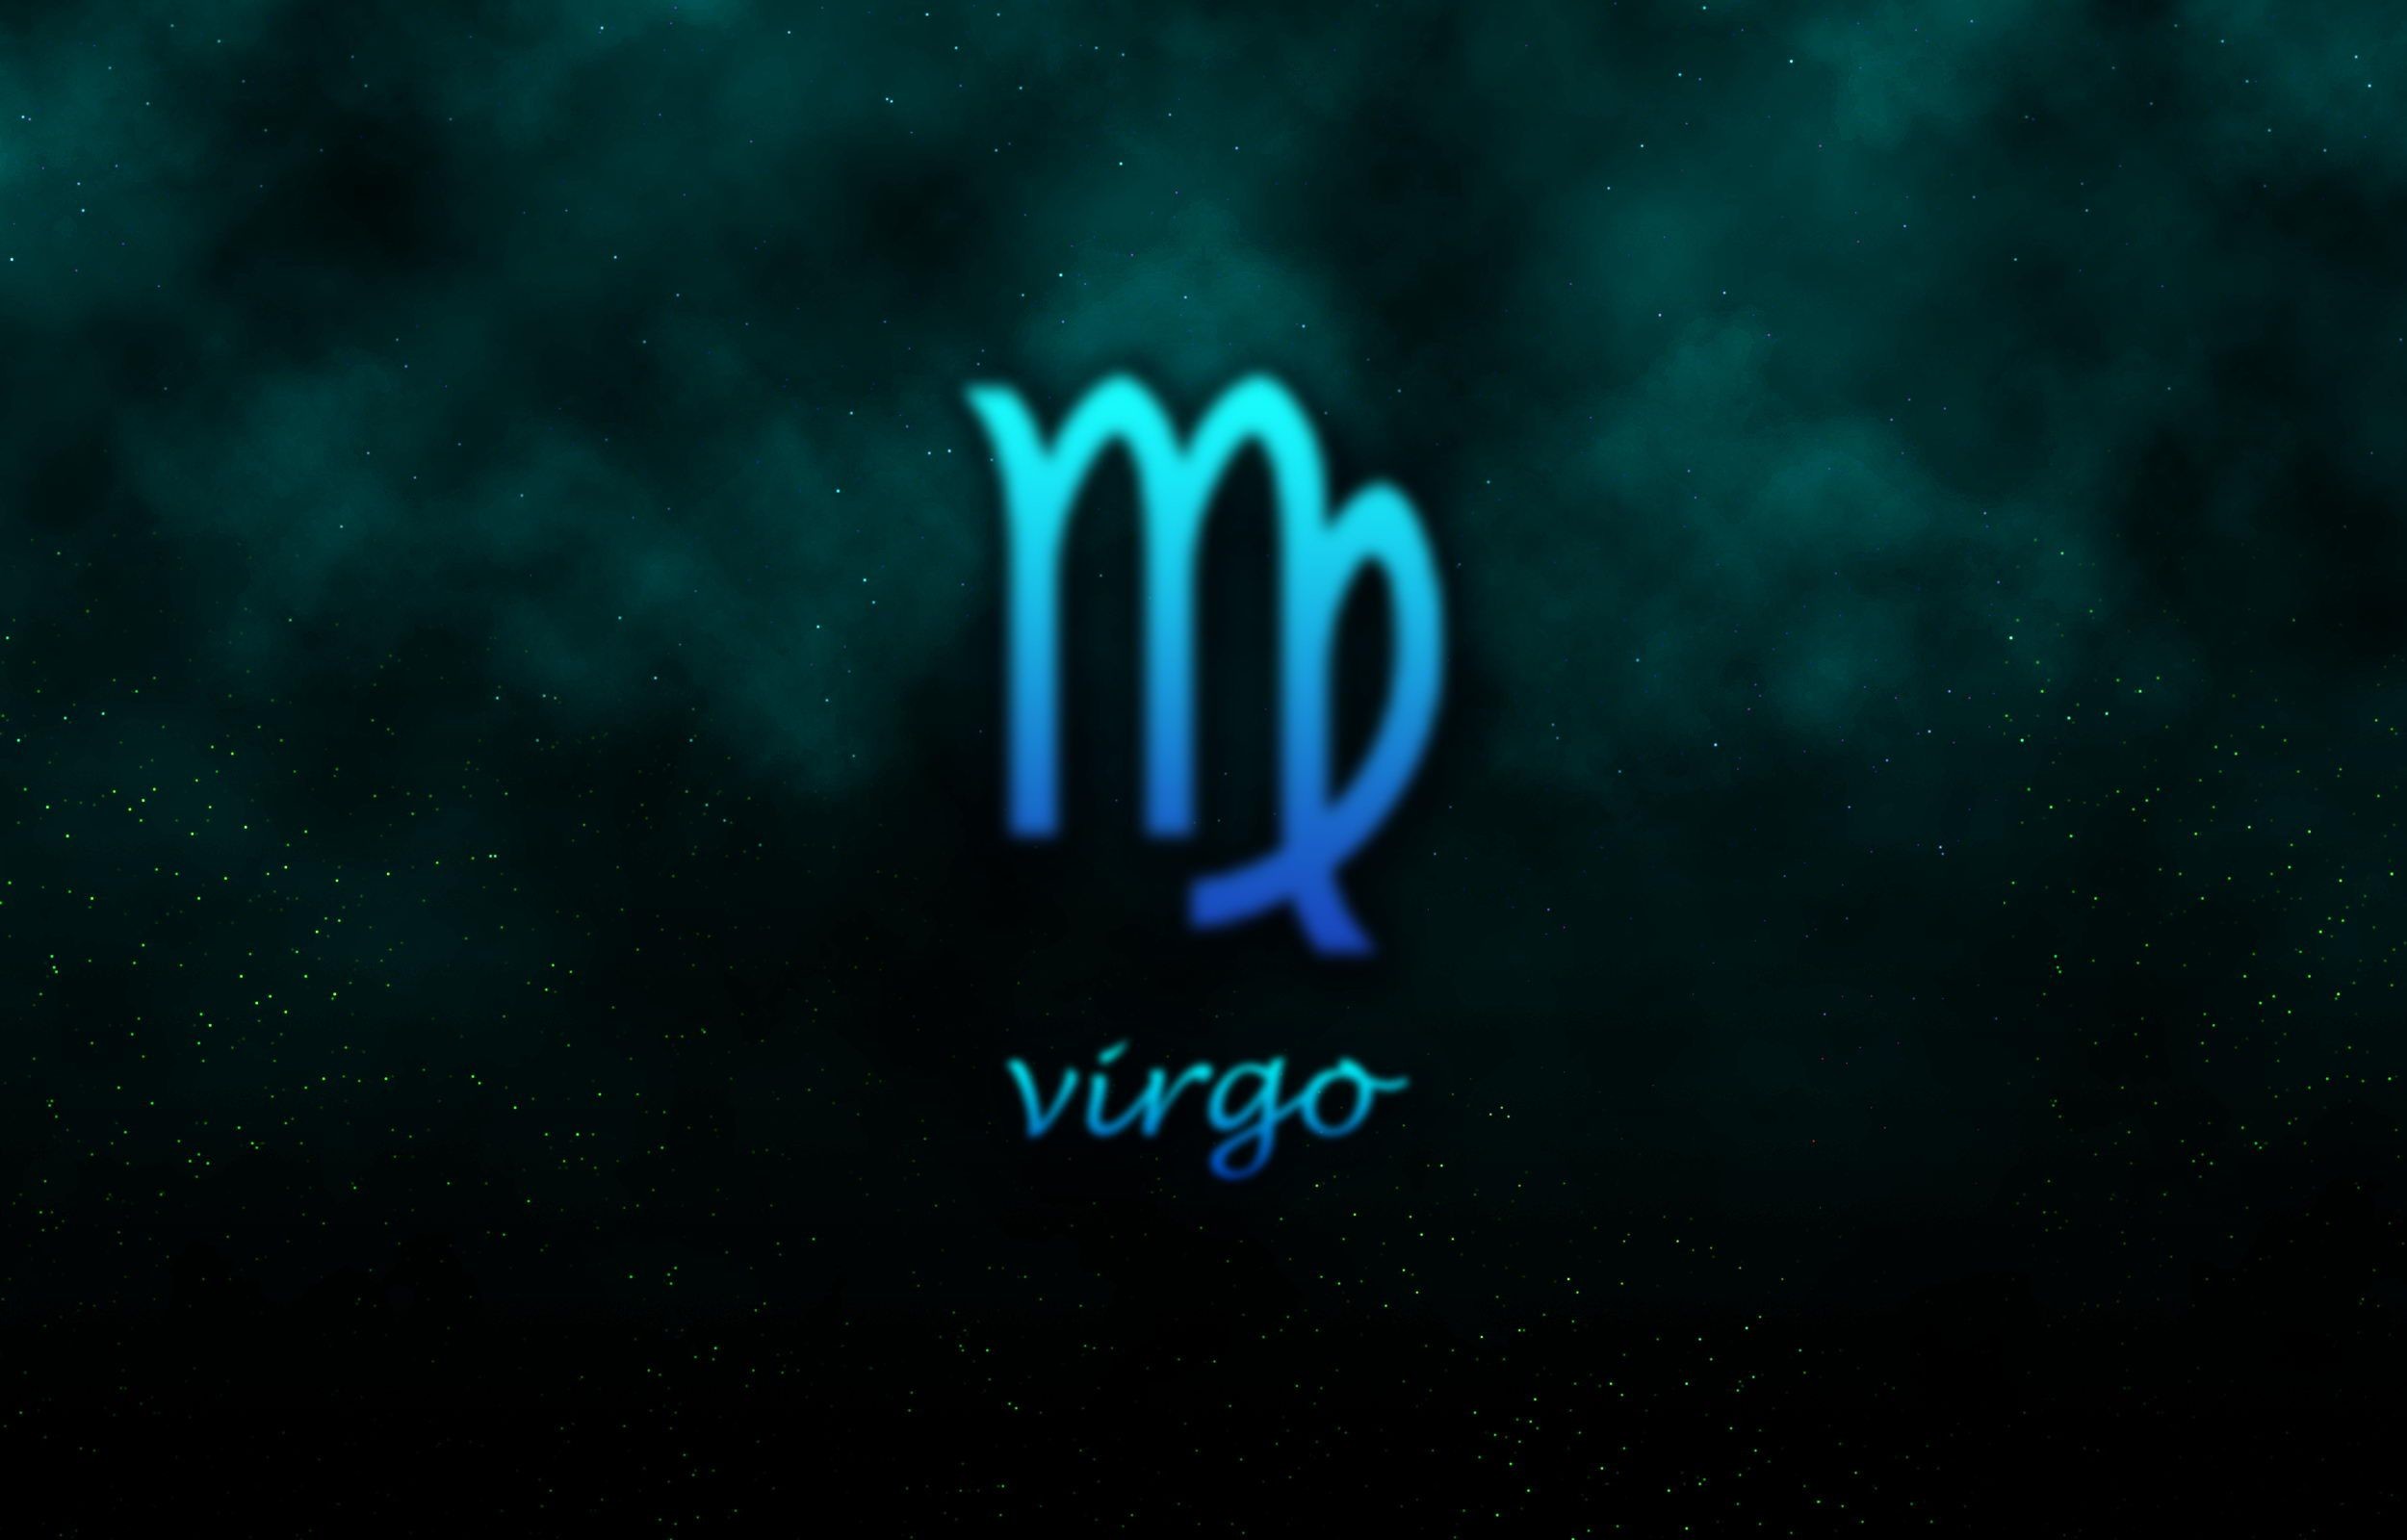 2500x1600 Ewallpapershub provide the latest image gallery of Virgo Wallpapers. View  our best collection of Virgo HD Wallpapers in different sizes and  resolutions.